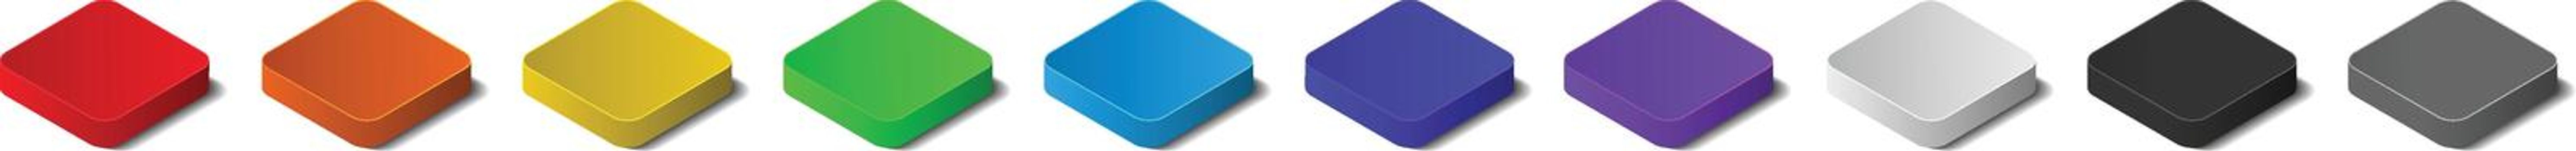 Colorful Isometric Top 3D Buttons with shadow